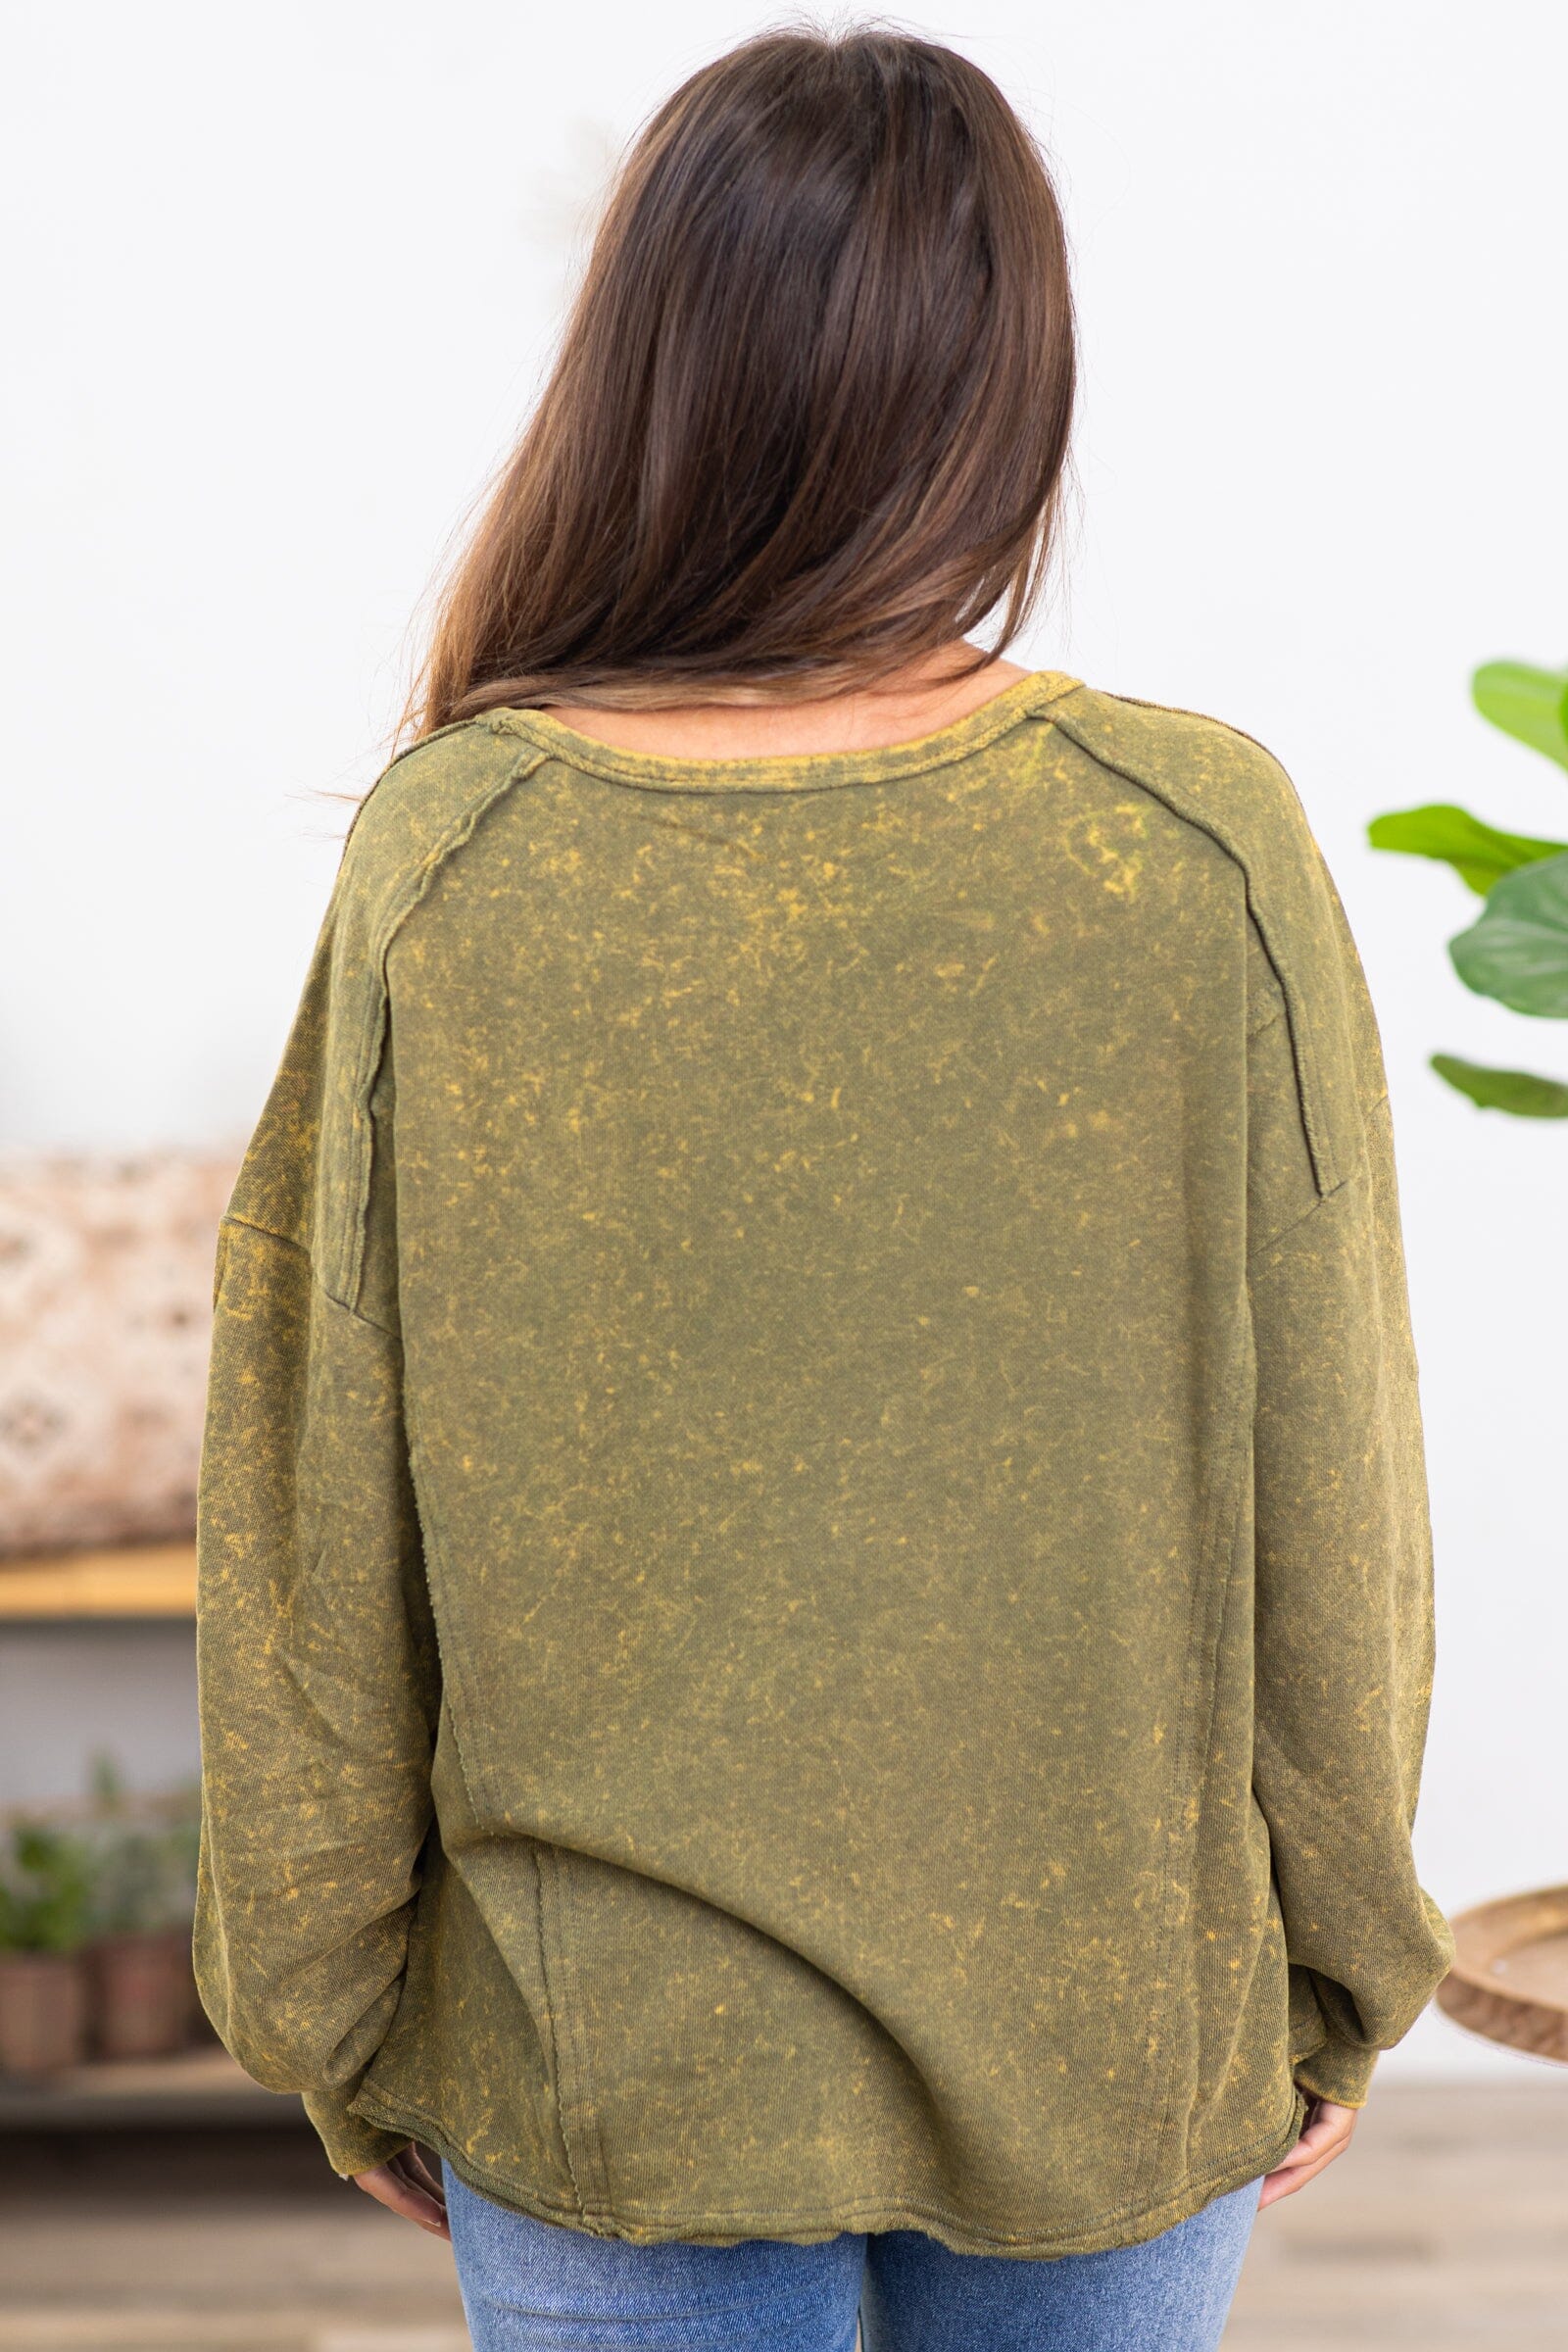 Olive Mineral Washed Sweatshirt - Filly Flair